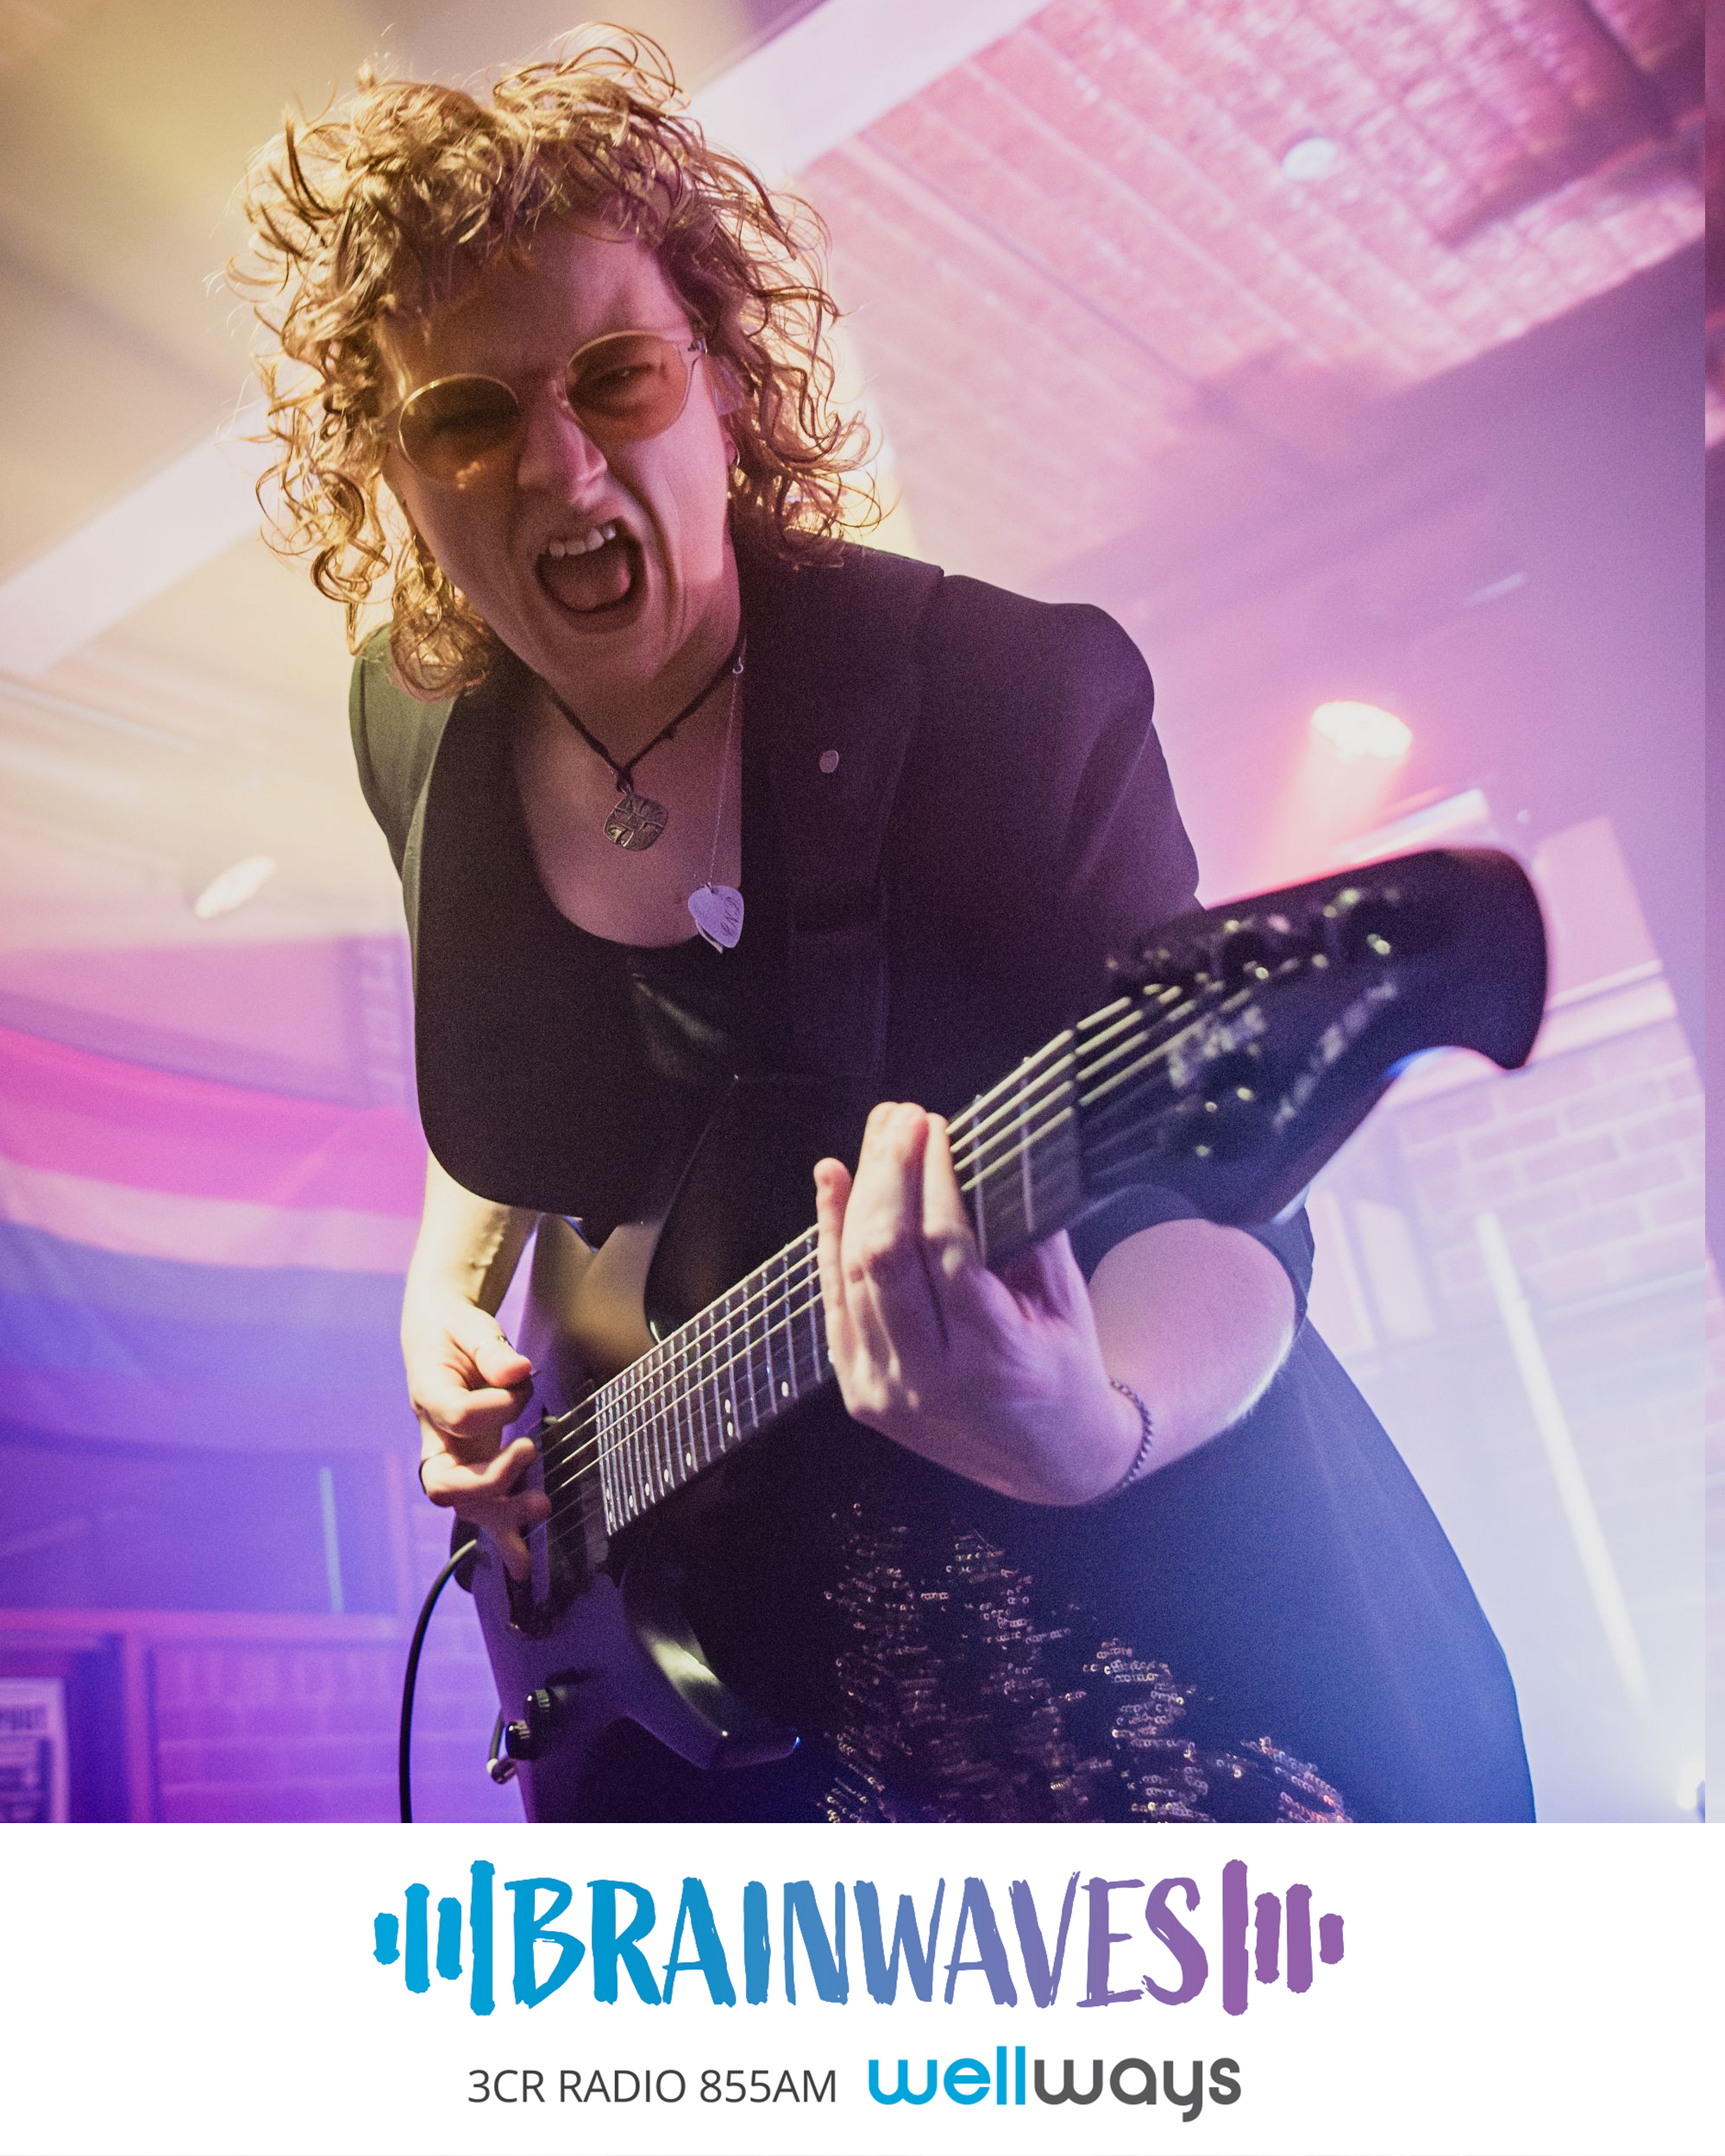 Simone Dow is a red headed caucasian woman on a stage holding and playing a black electric guitar, she wears glasses and a black sequinned jacket and is pulling a screaming face as she leans down towards the camera. There are purple lights behind her.